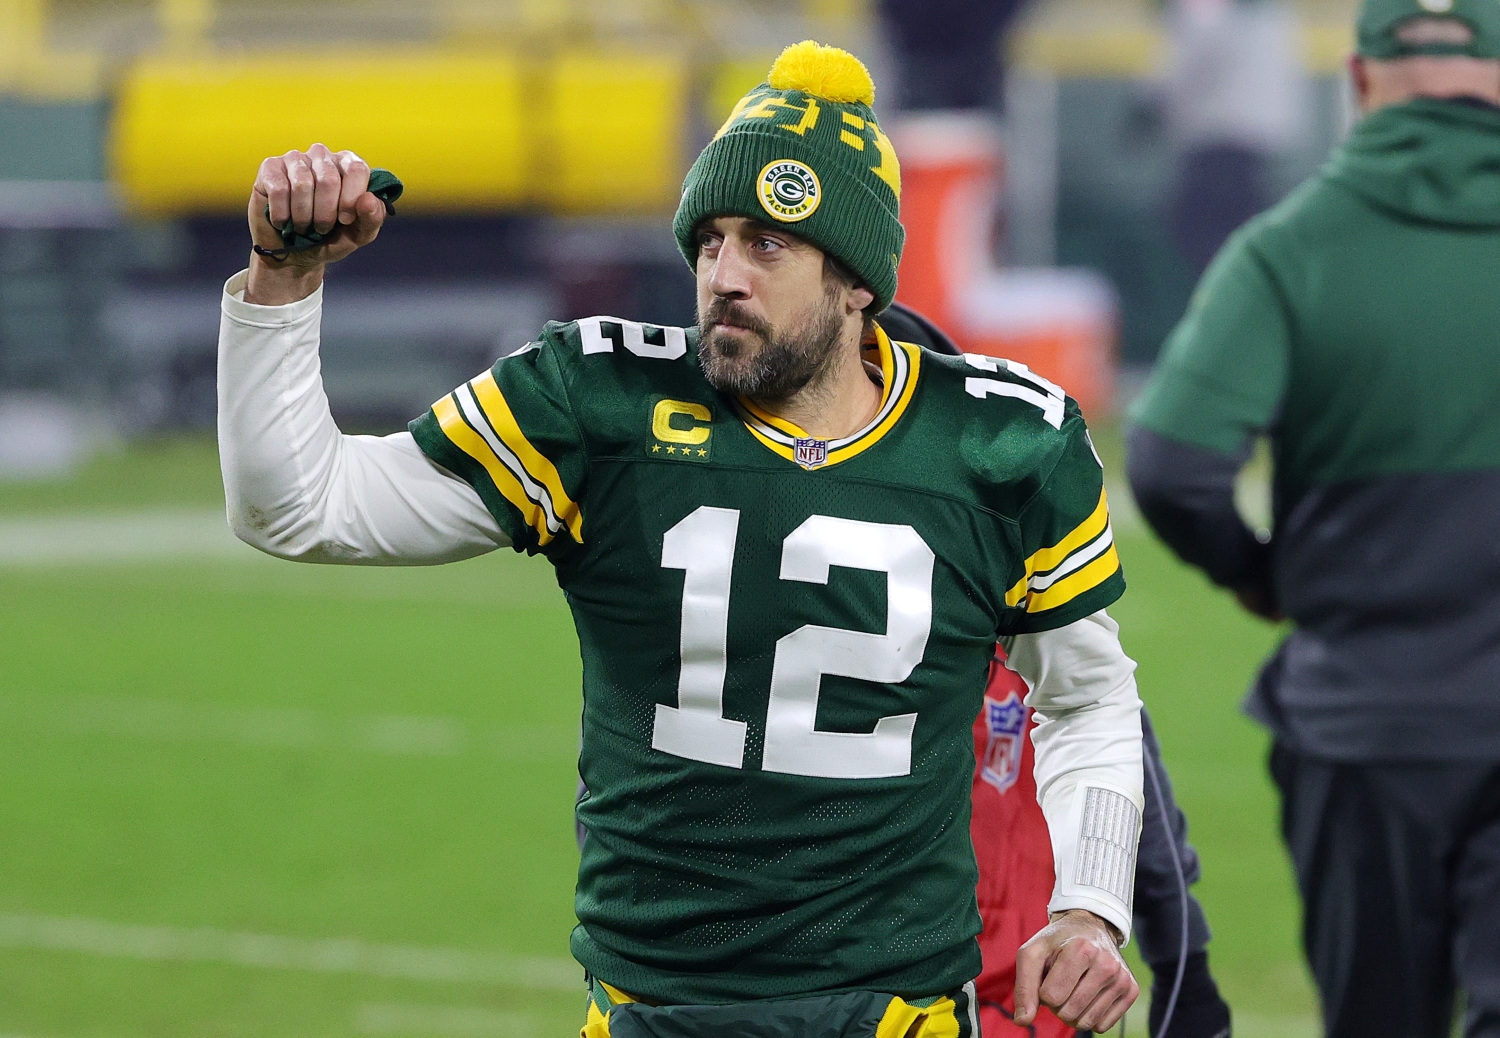 Aaron Rodgers of the Green Bay Packers celebrates defeating the Los Angeles Rams 32-18 in the NFC Divisional Playoff game.